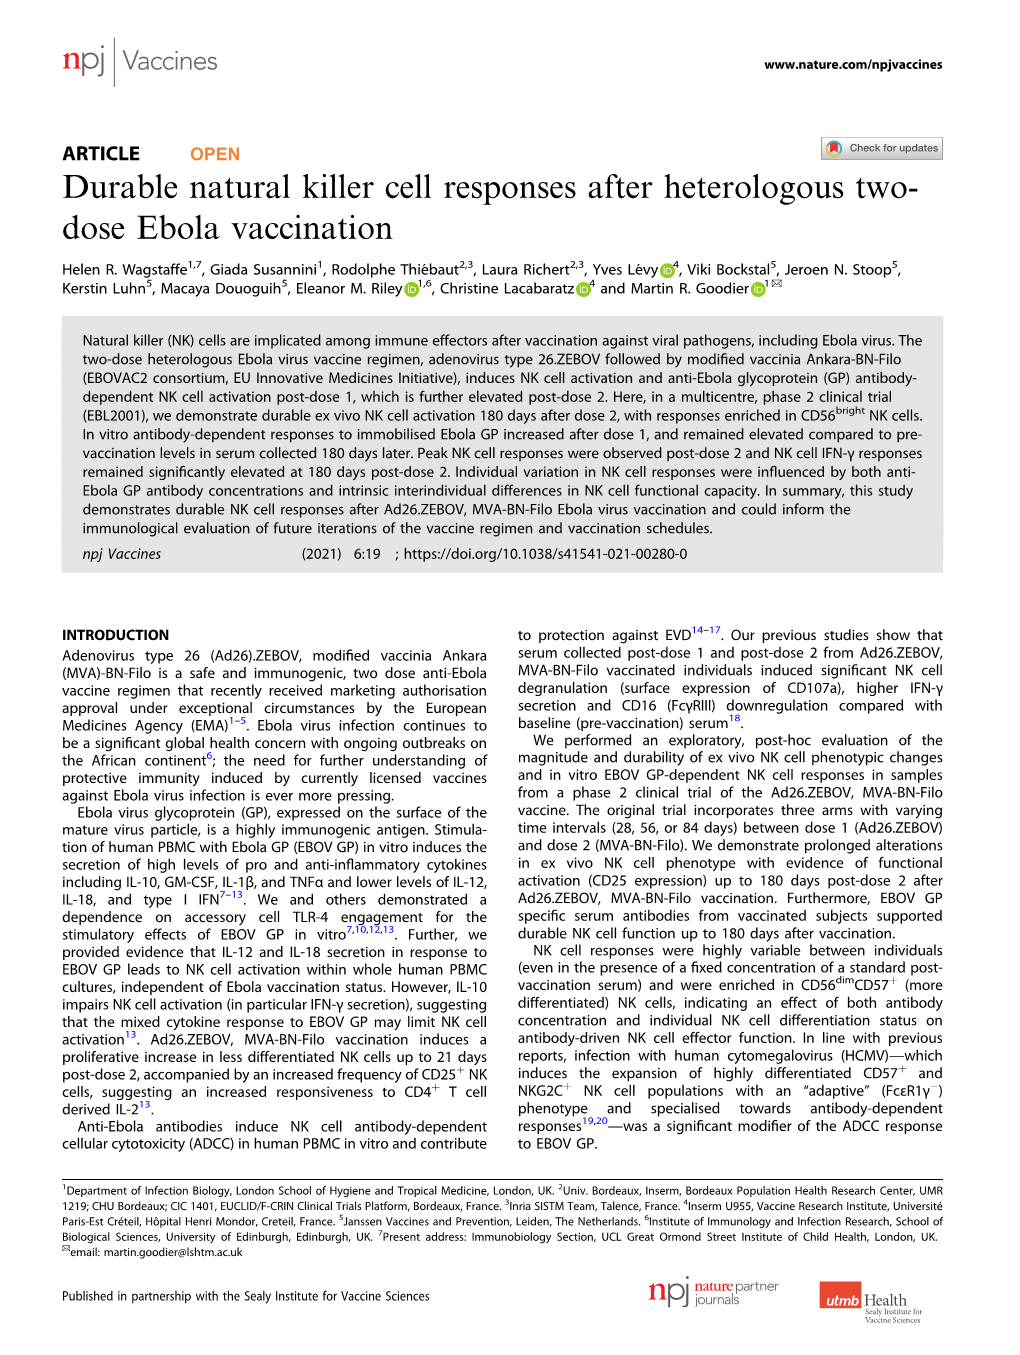 Durable Natural Killer Cell Responses After Heterologous Two-Dose Ebola